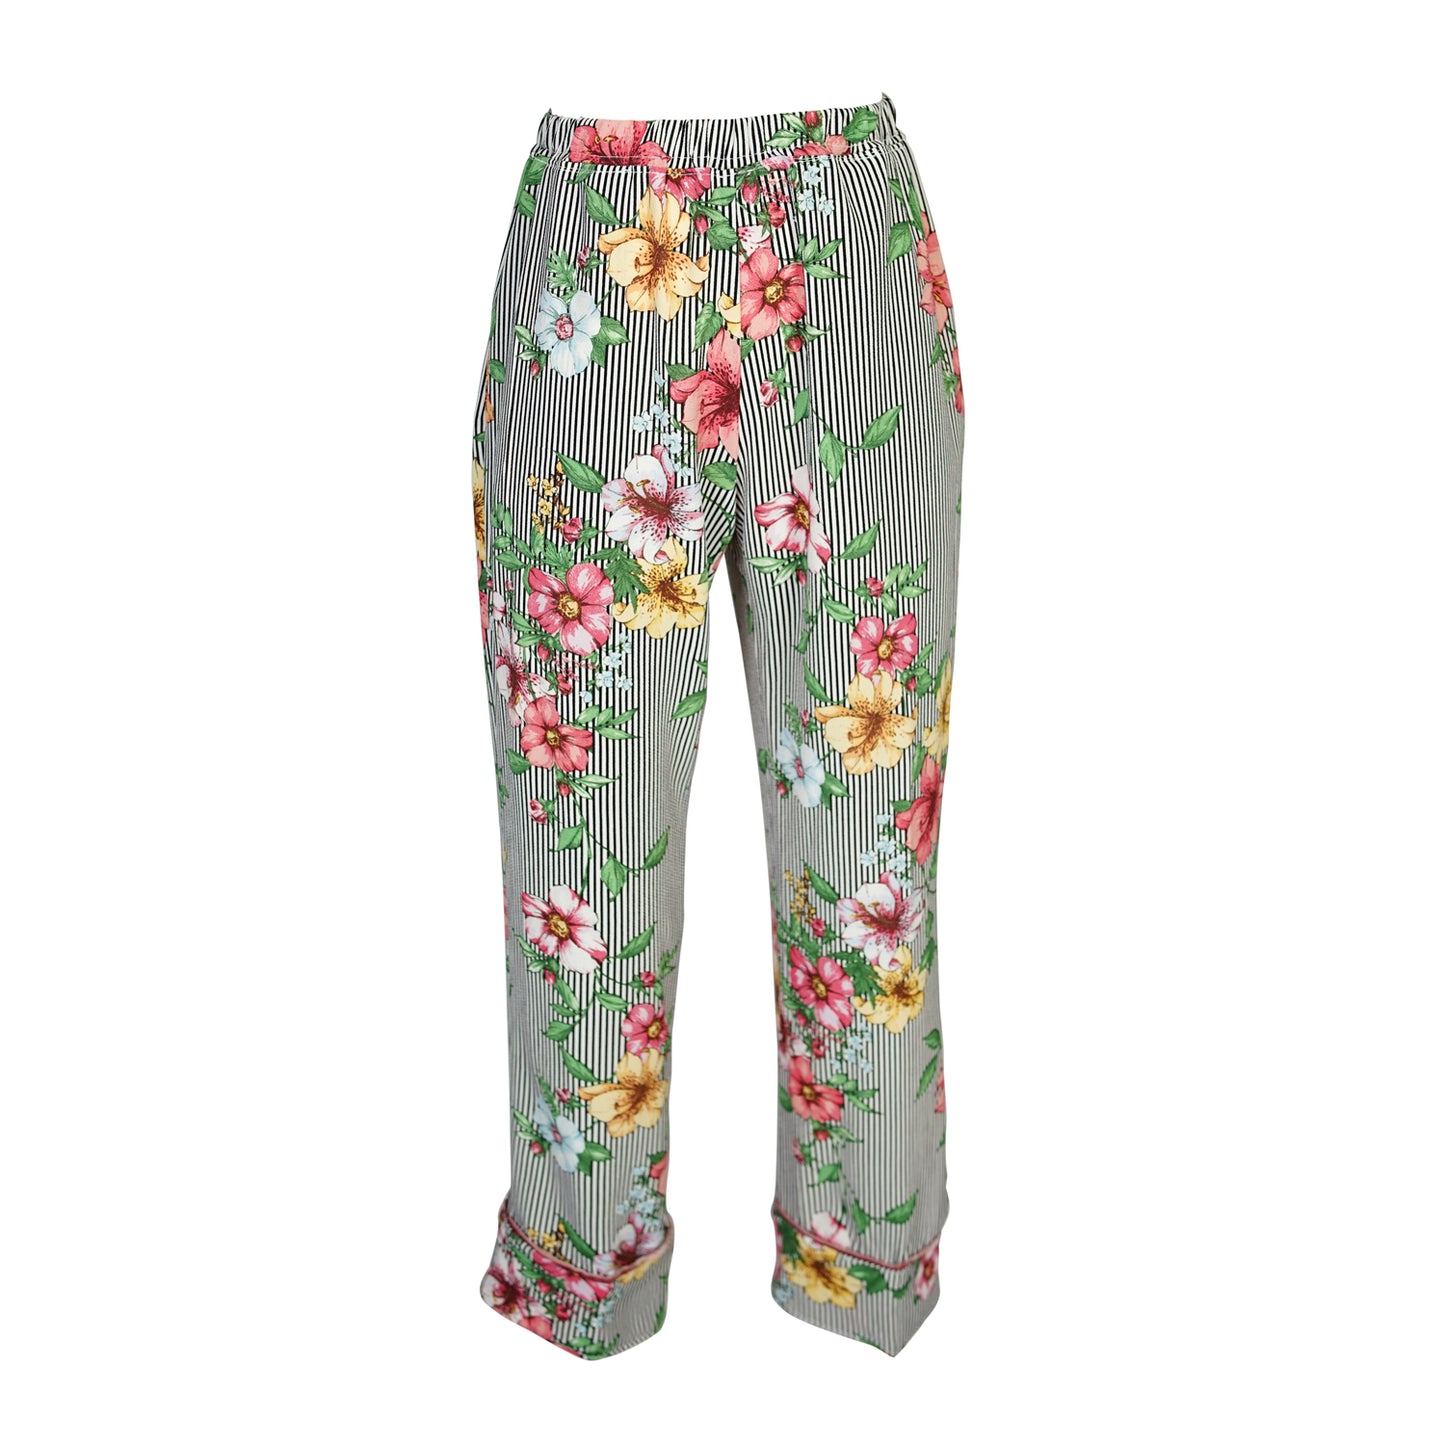 Jennafer Grace Liliana Flora Stripe Paglamas black white pinstripe with floral pink and yellow flowers and blush pink velvet piping glam pajamas pjs co-ord coord matching set lounge wear wrap top tapered pant boho bohemian hippie unisex handmade in California USA